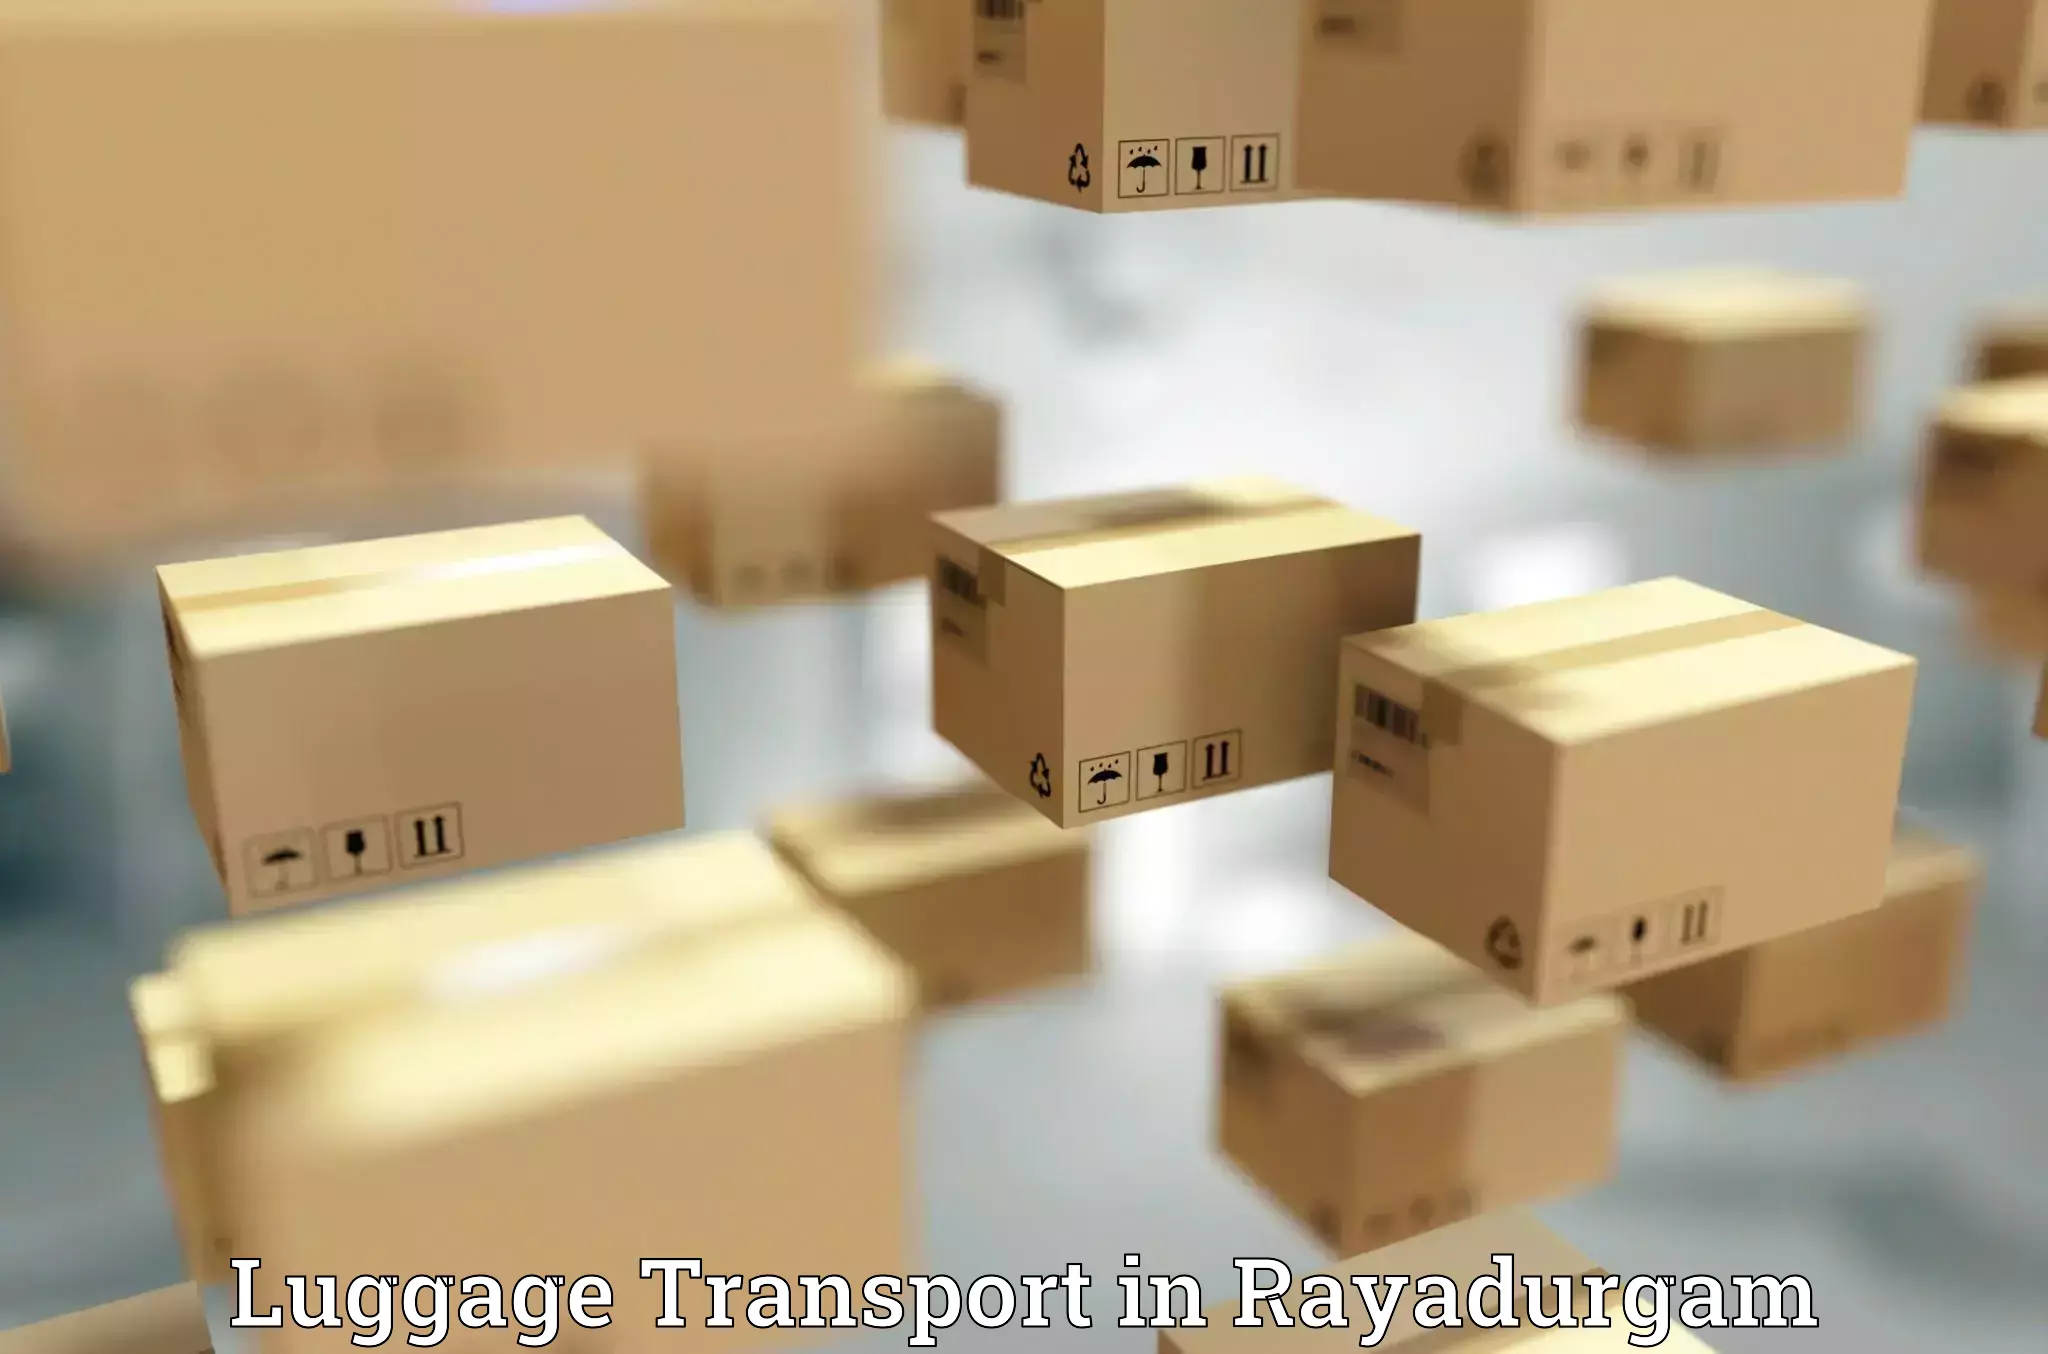 Luggage storage and delivery in Rayadurgam